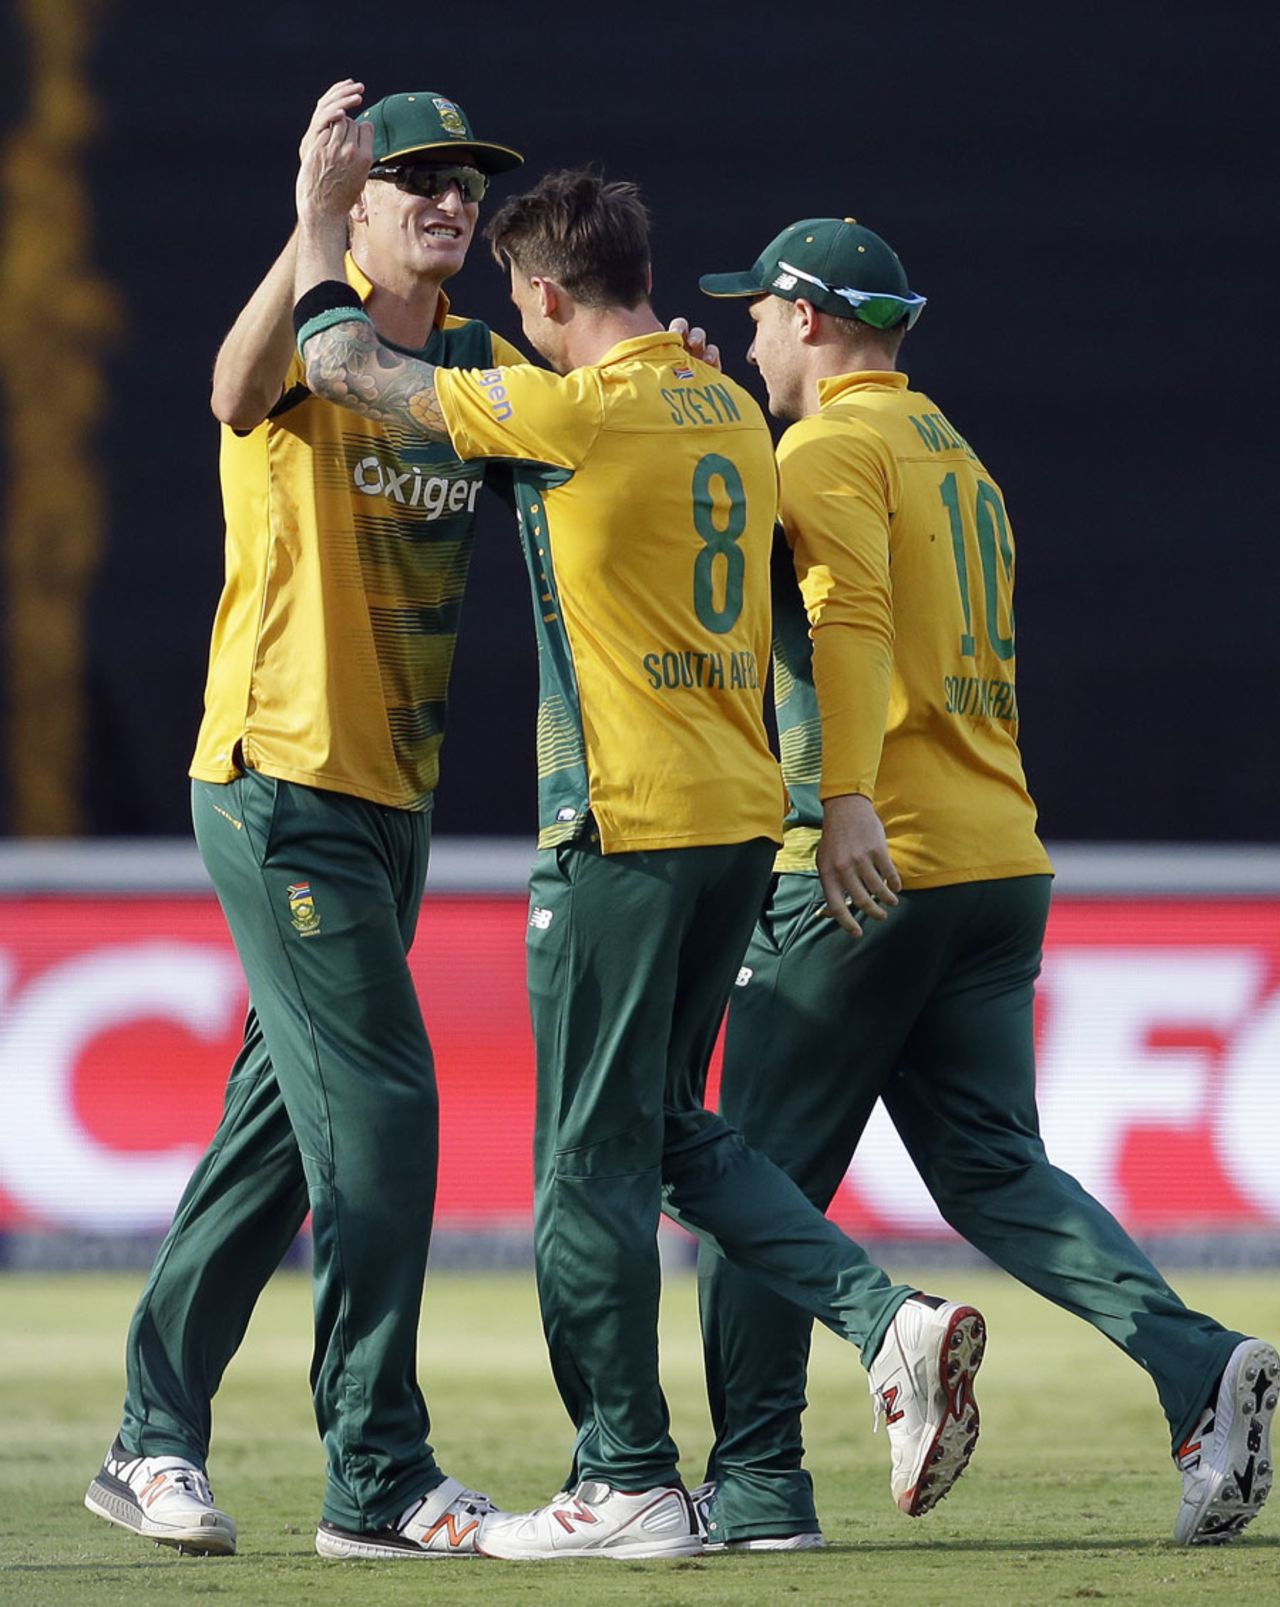 Dale Steyn picked up two wickets on his comeback, South Africa v Australia, 2nd T20, Johannesburg, March 6, 2016